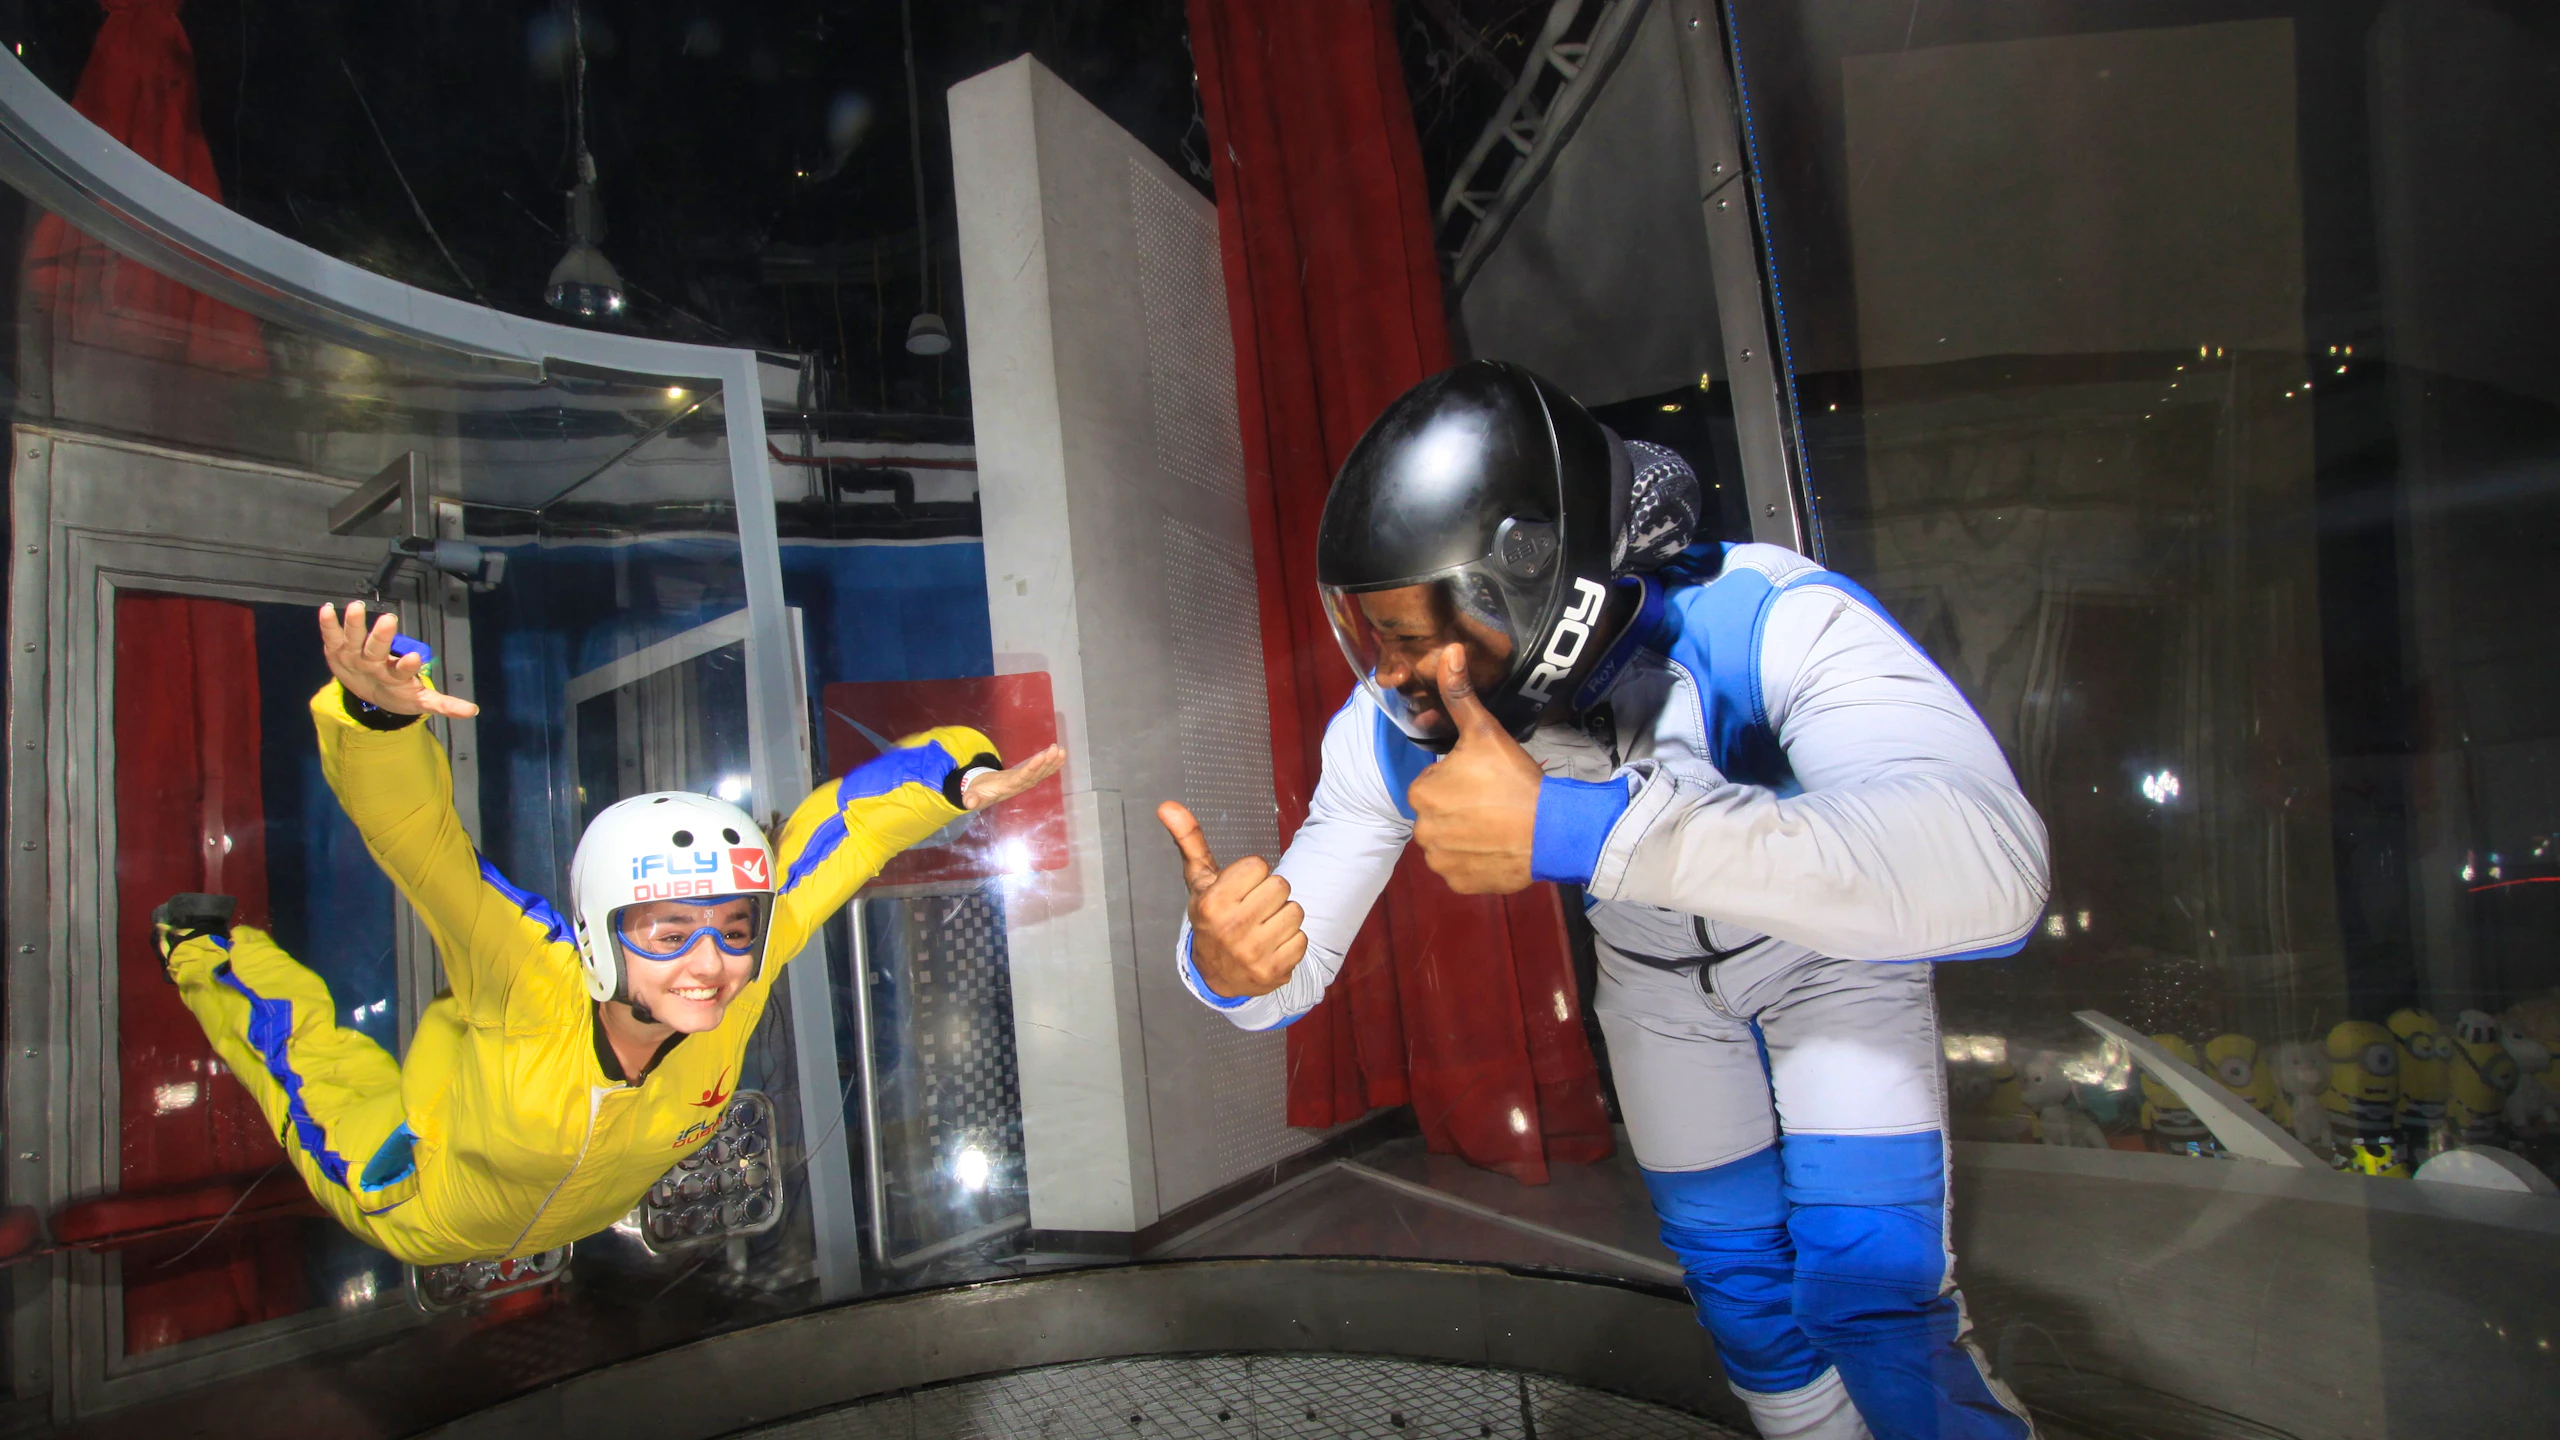 iFly Dubai - Indoor Skydiving Experience Location